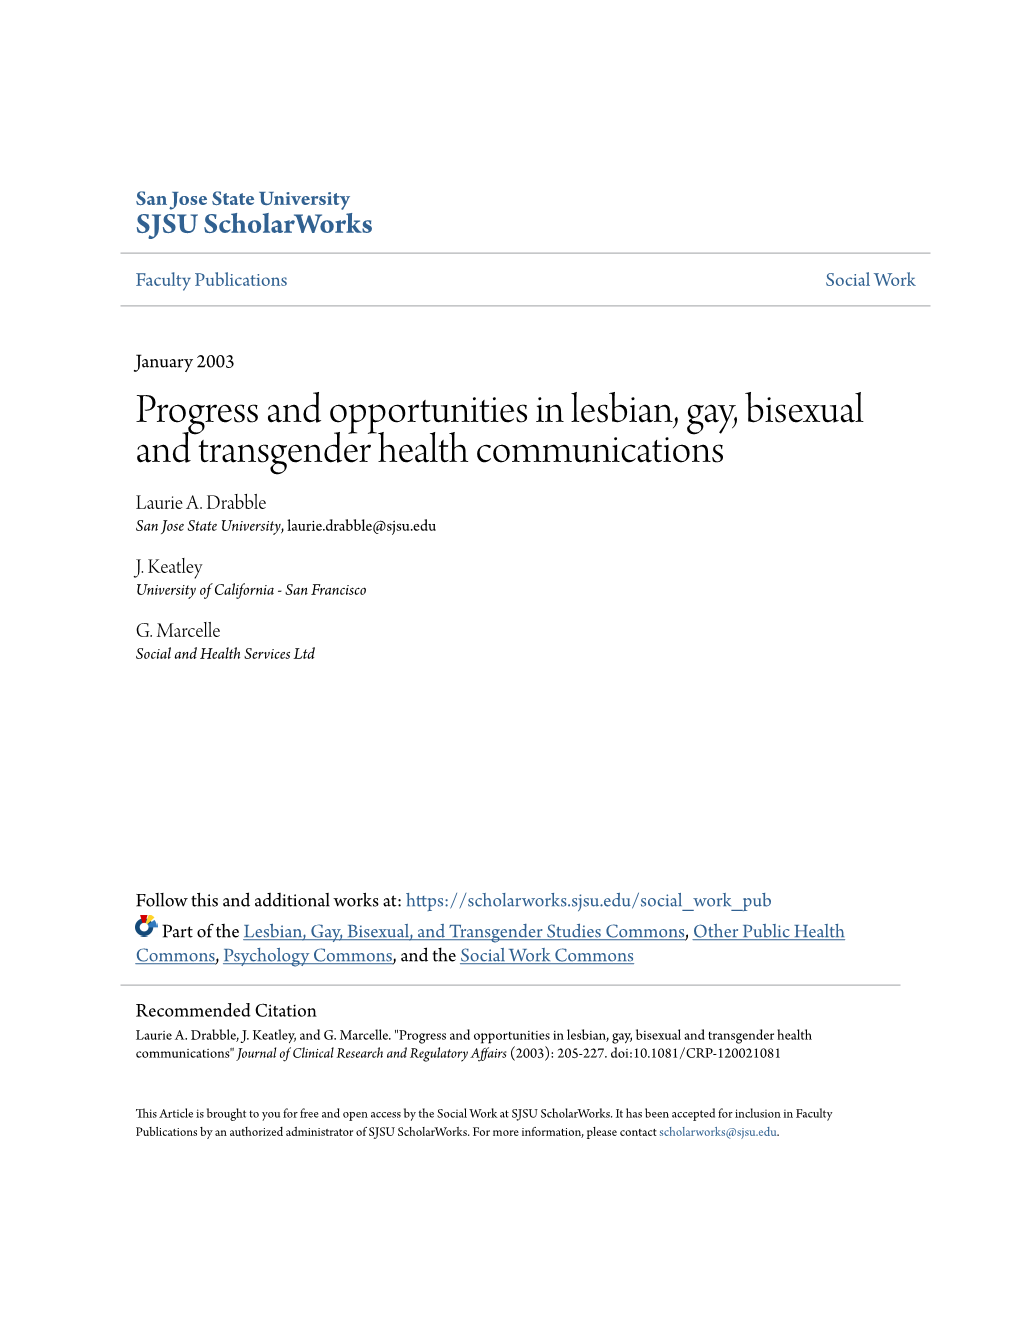 Progress and Opportunities in Lesbian, Gay, Bisexual and Transgender Health Communications Laurie A